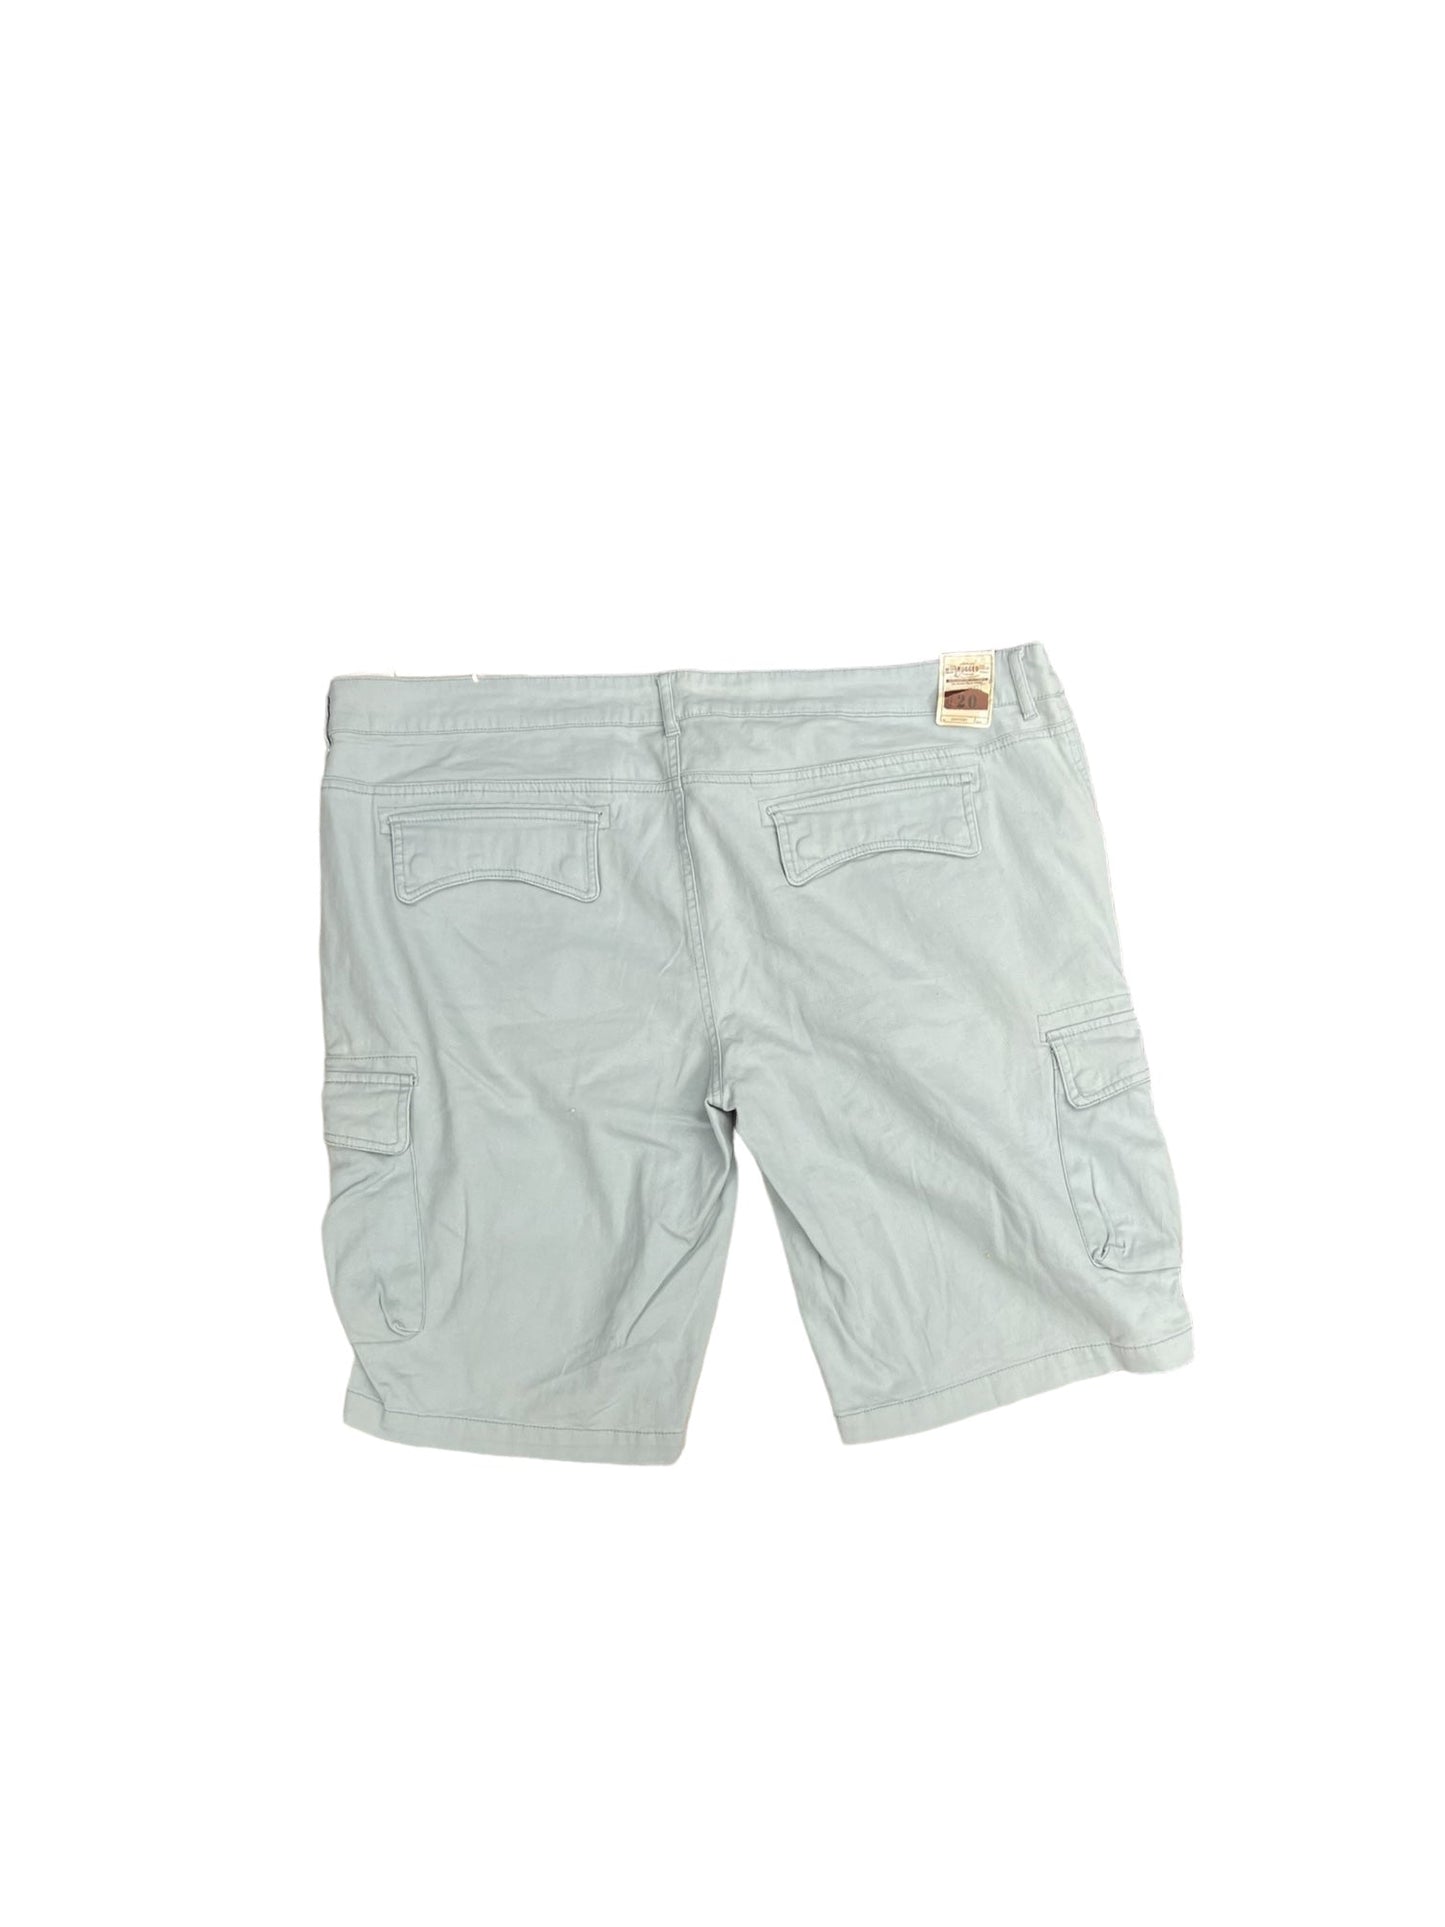 Shorts By AUTHENTIC RUGGED COMPANY Size: 20